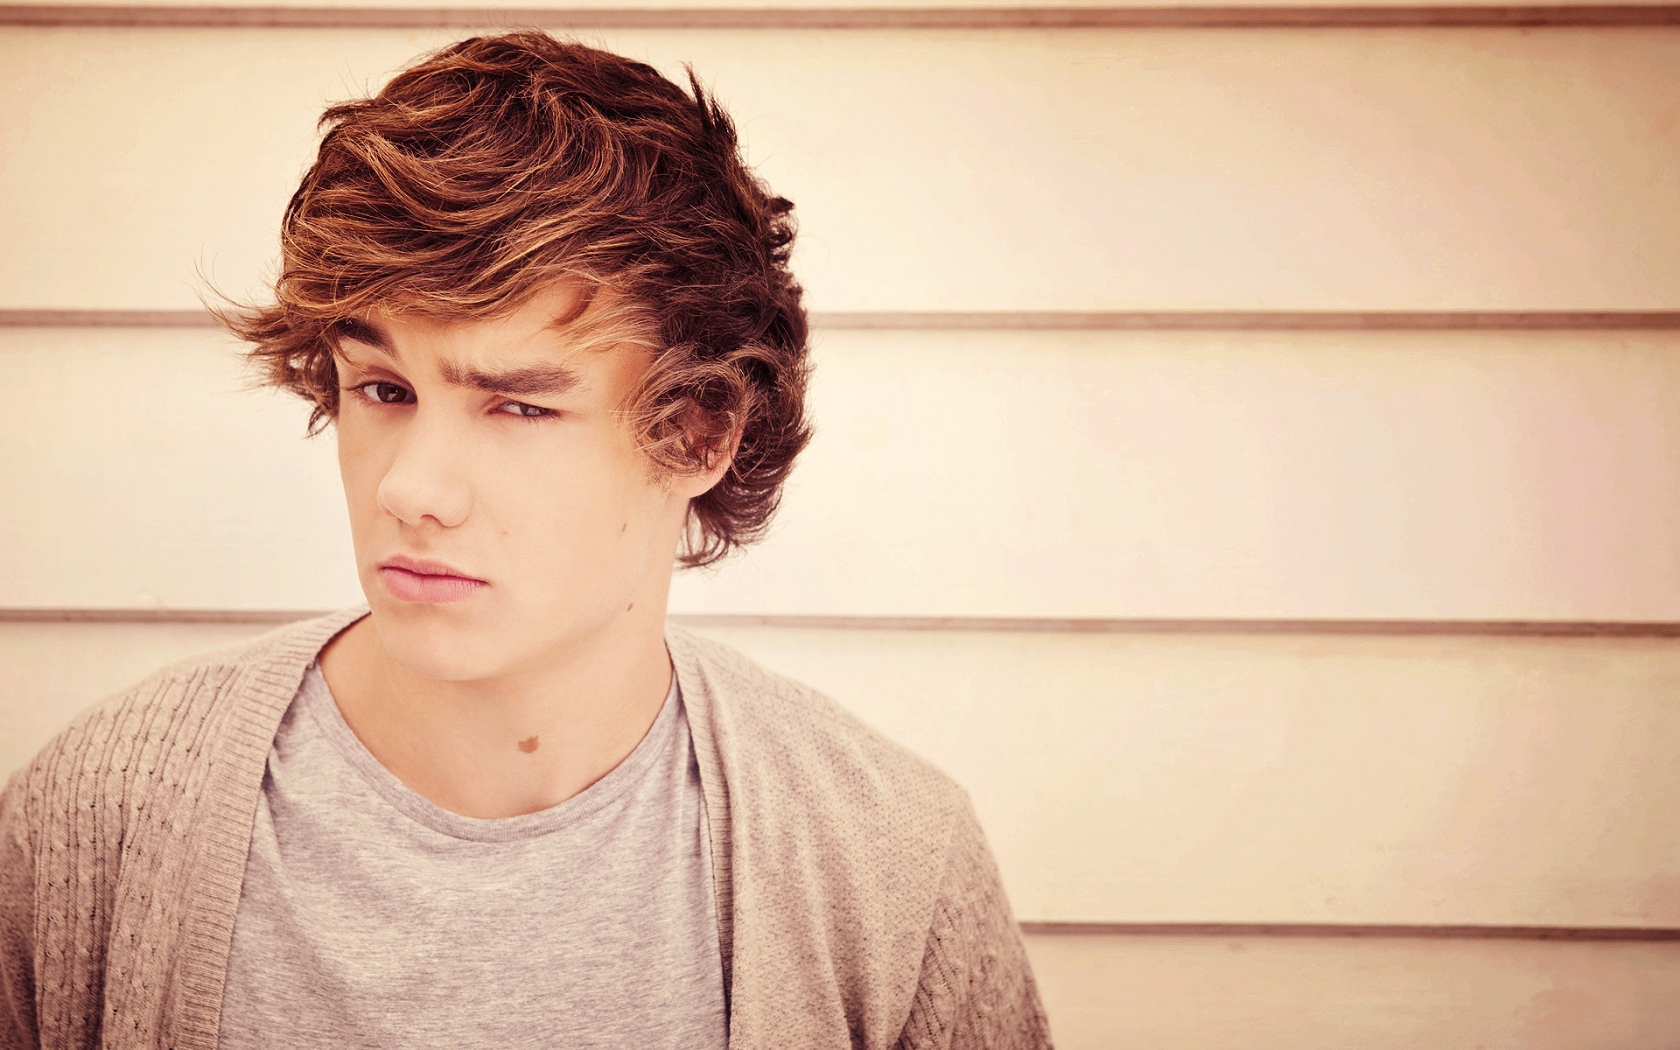 Liam Payne Look for 1680 x 1050 widescreen resolution